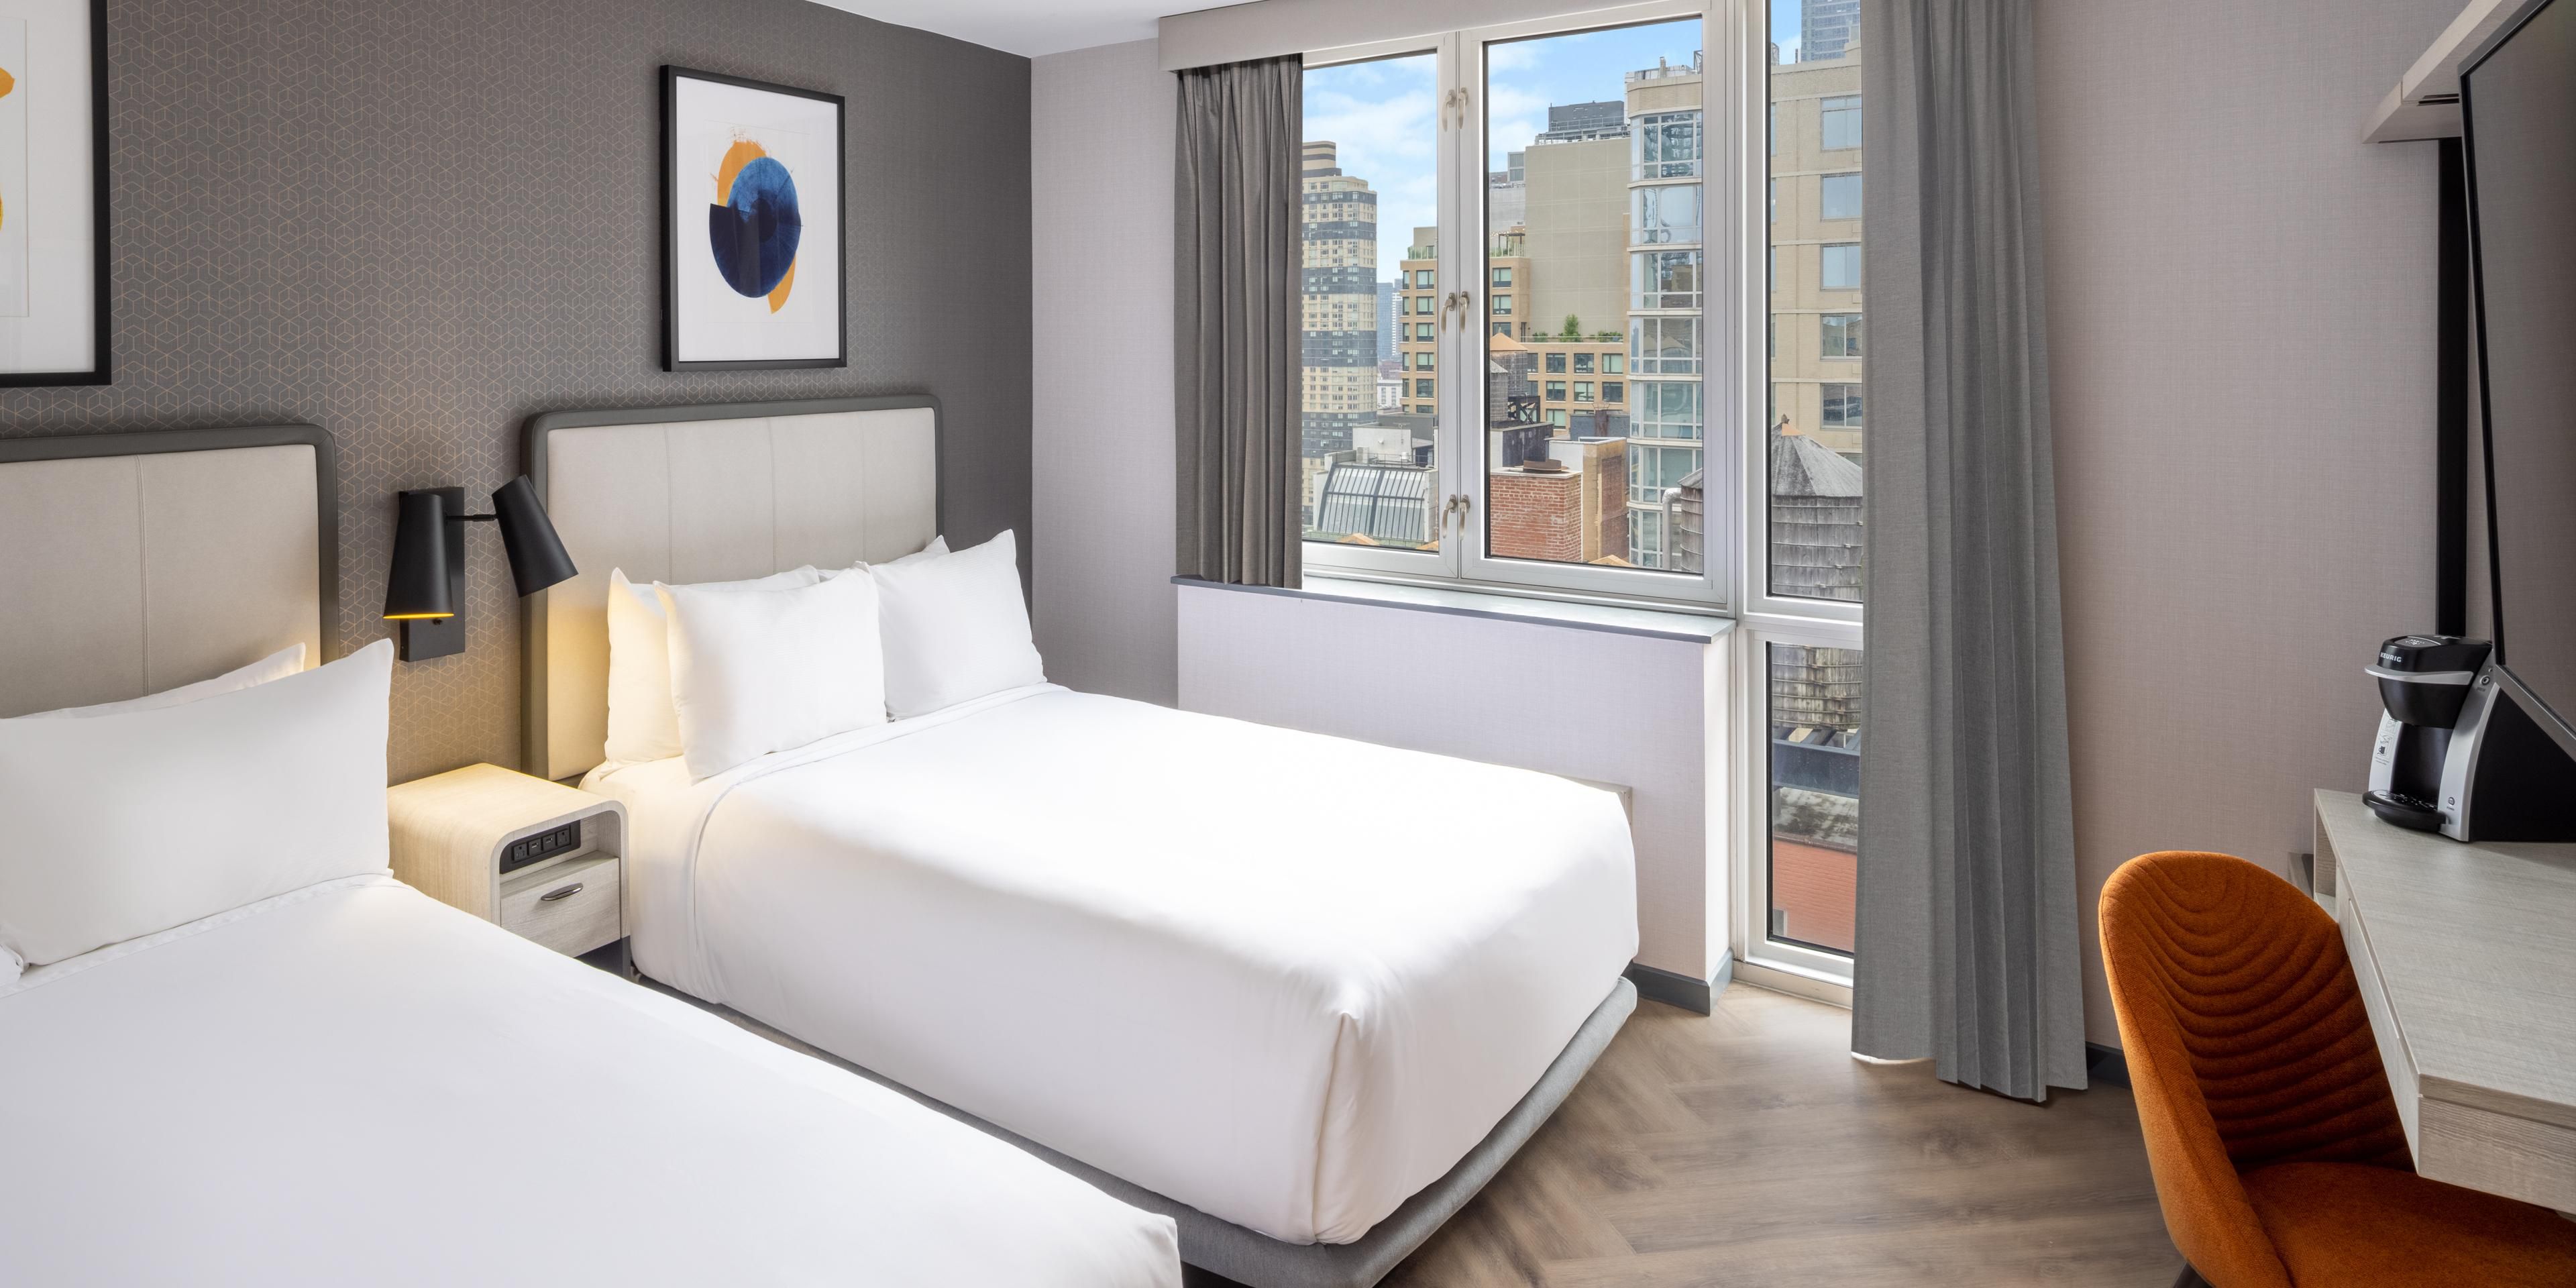 Renovated guest room with two double beds and views of Manhattan.